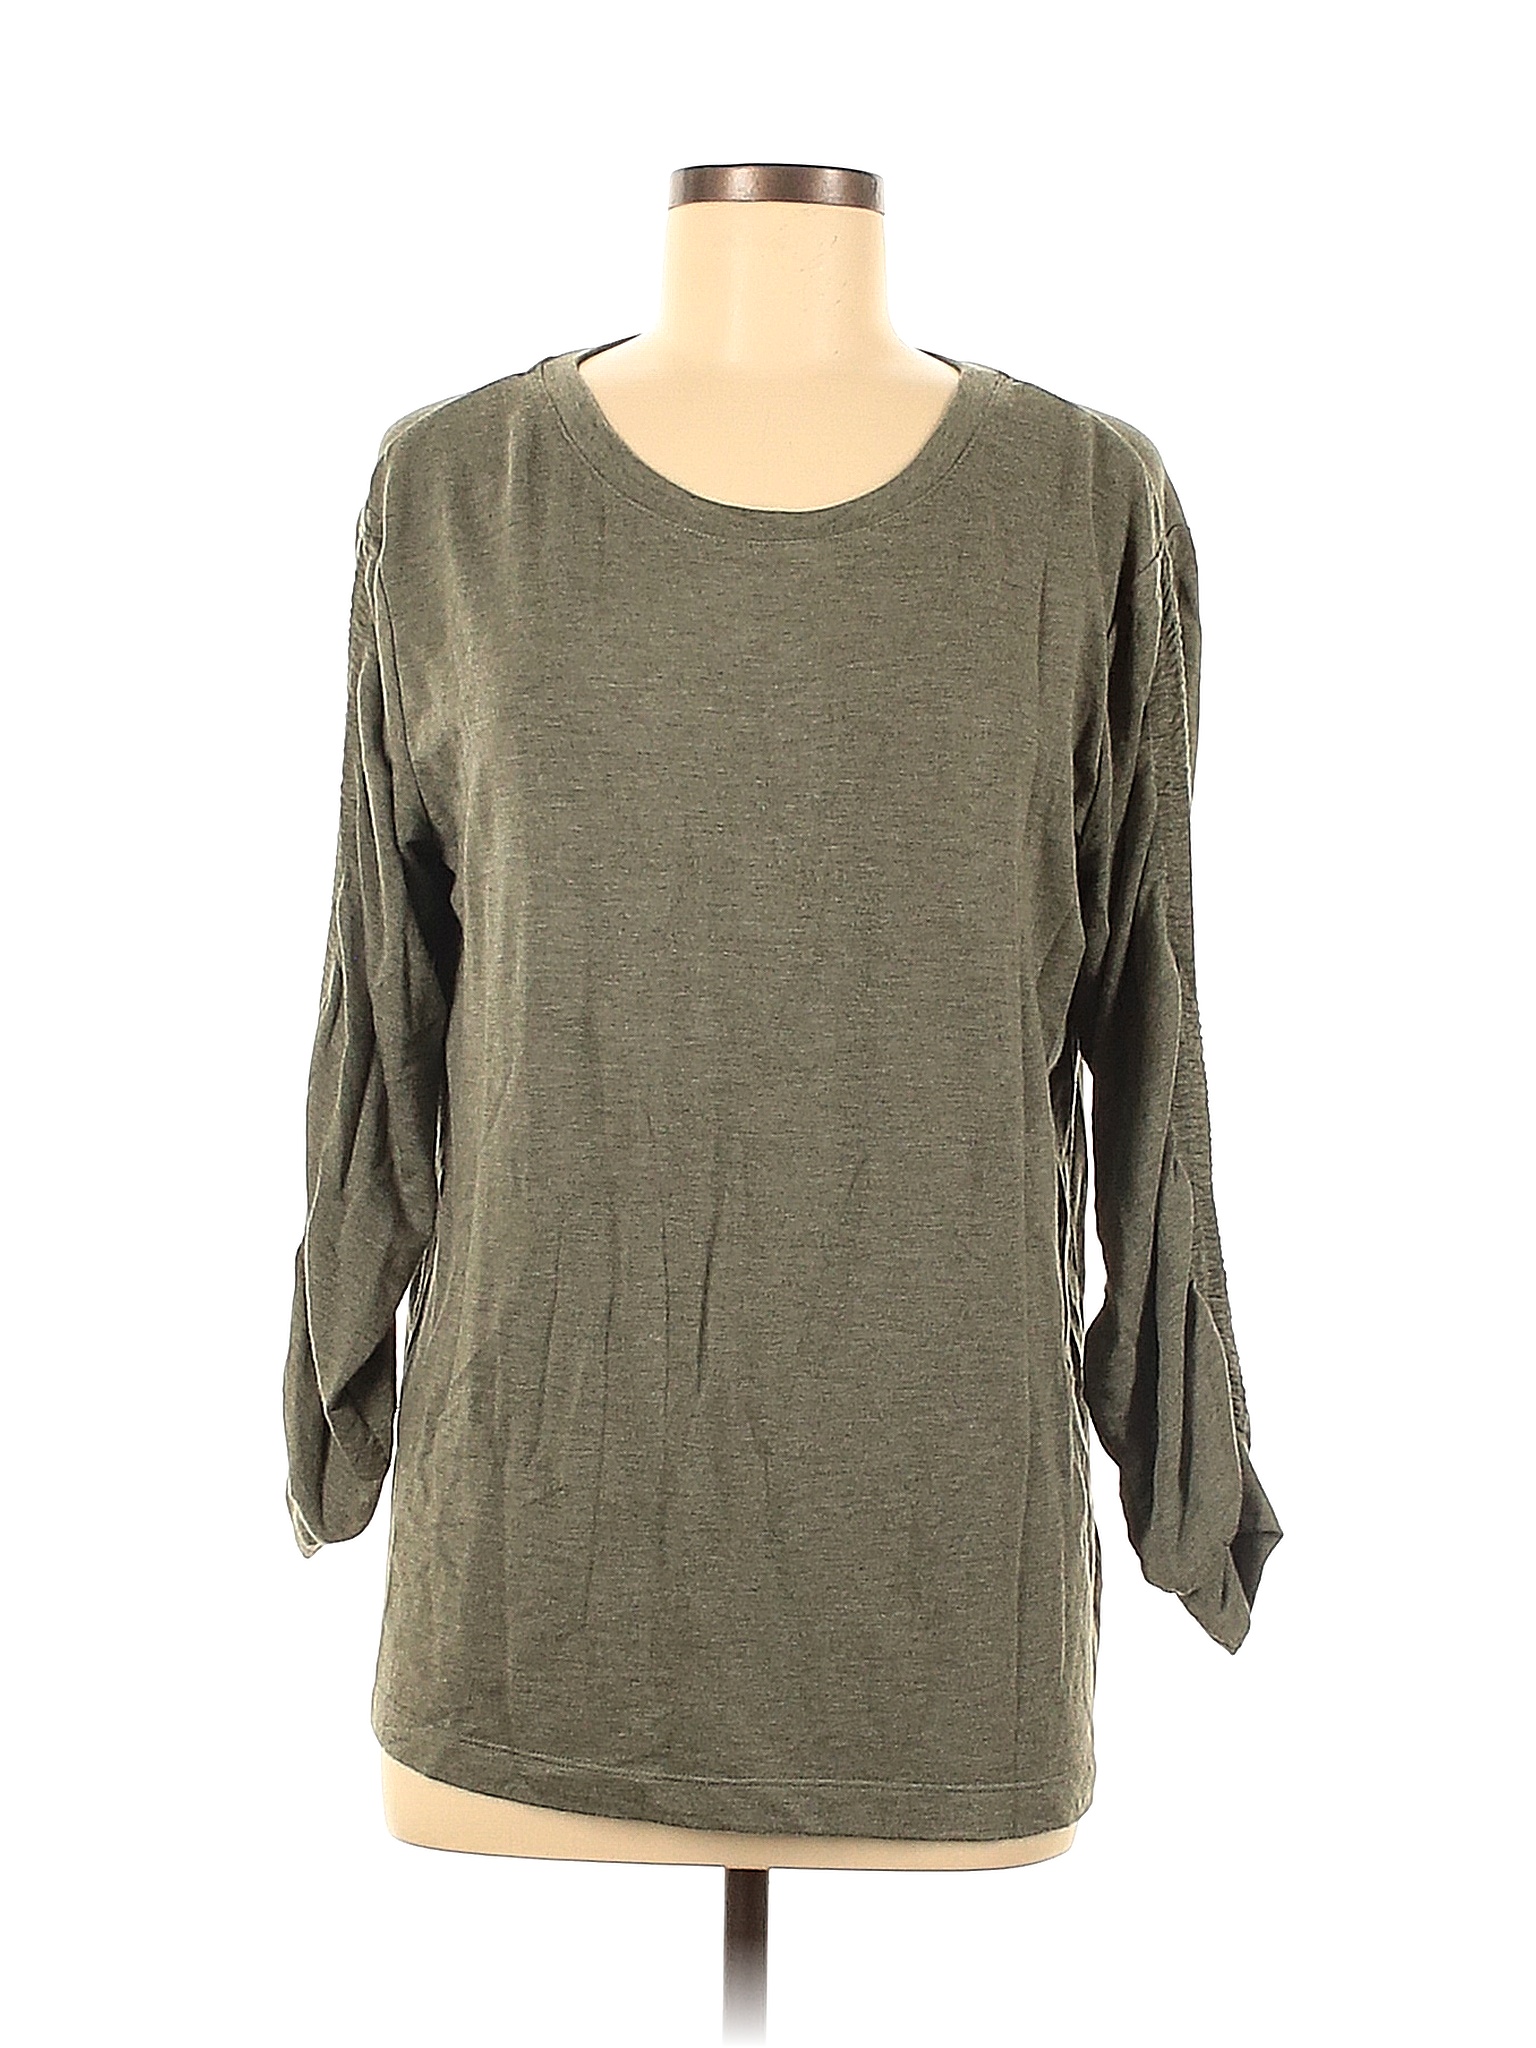 Jane and Delancey Solid Green Long Sleeve Top Size M - 68% off | thredUP